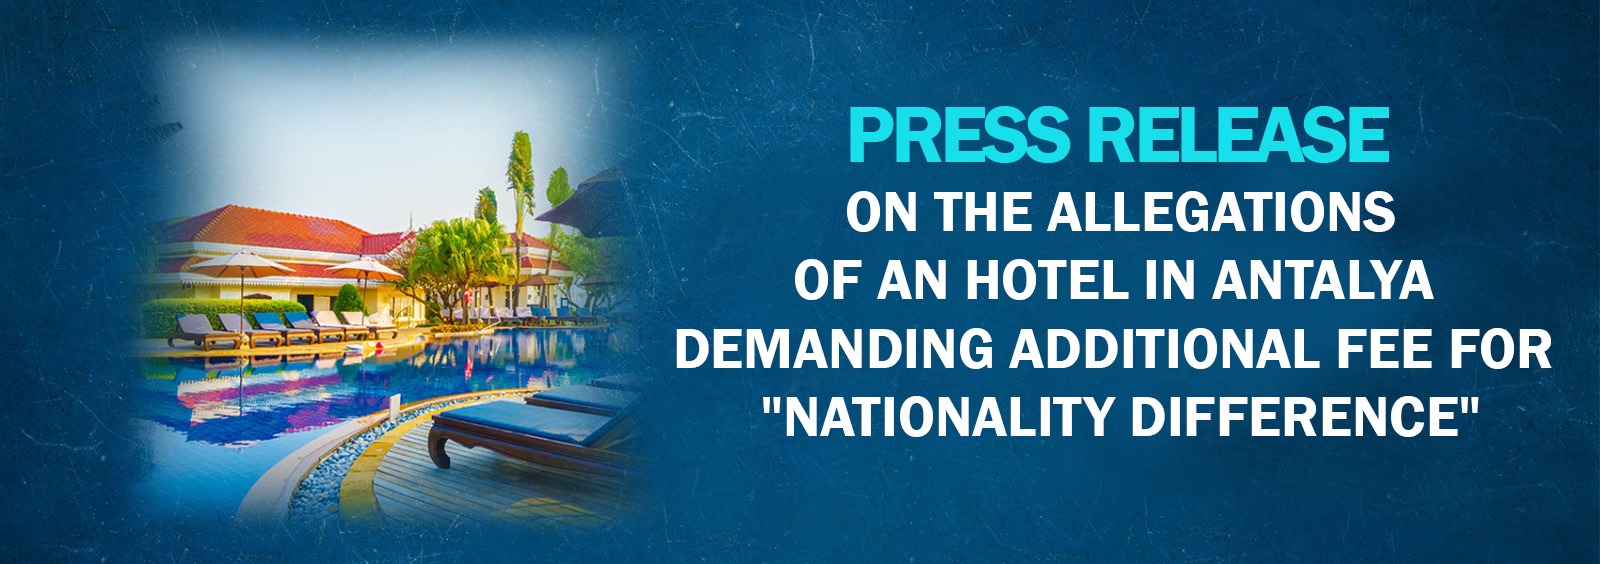 Press Release on the Allegations of an Hotel in Antalya Demanding Additional Fee for Nationality Difference